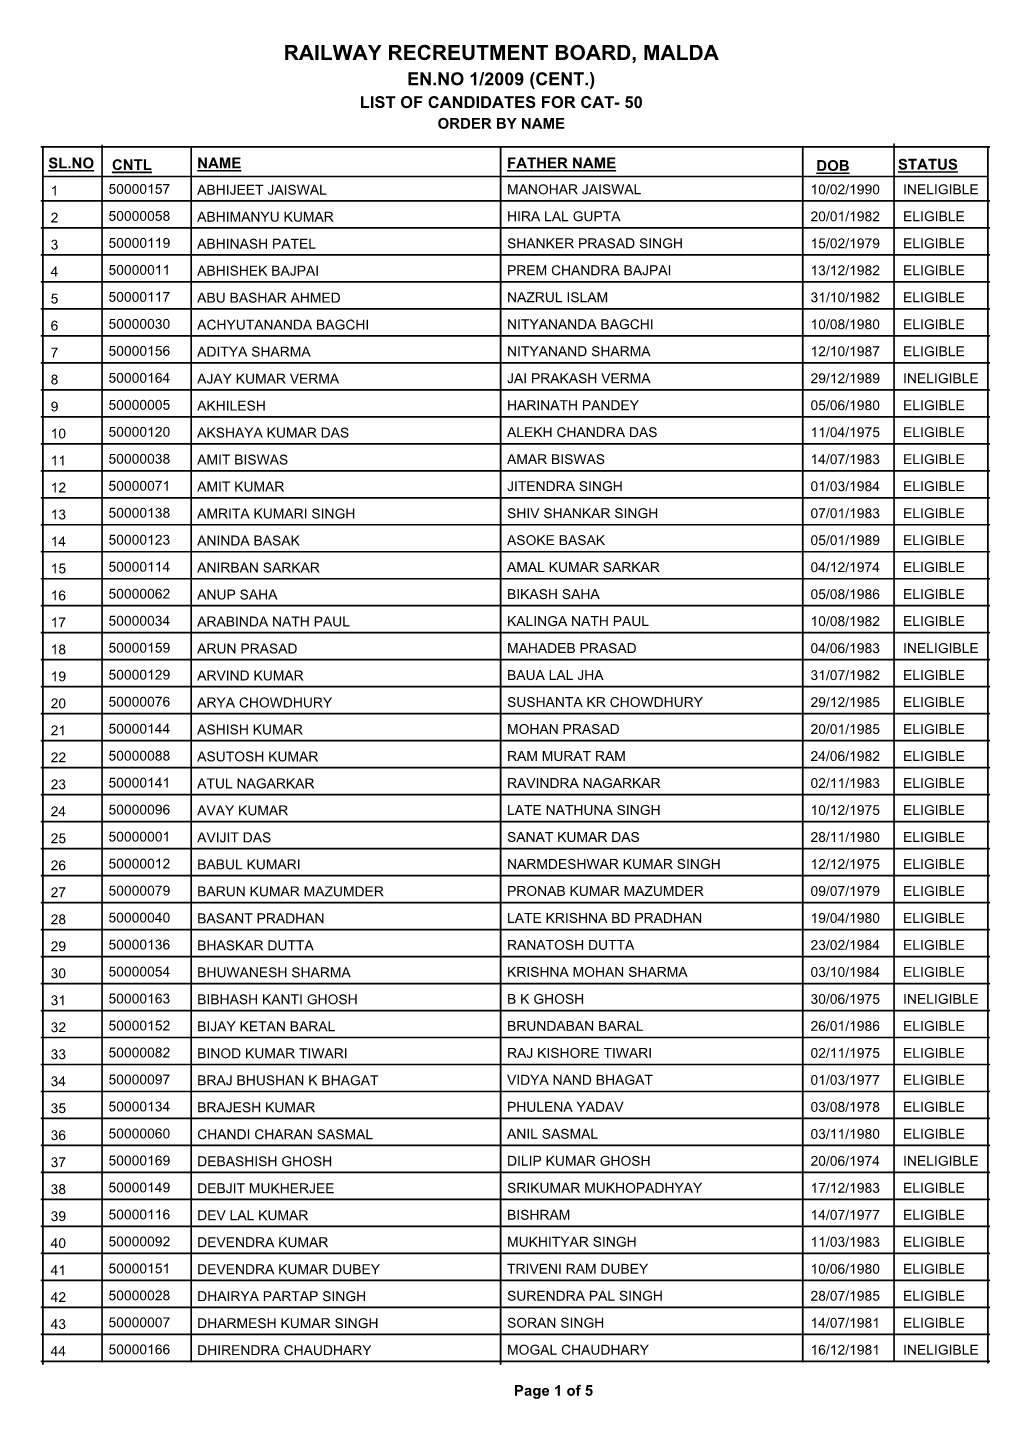 Railway Recreutment Board, Malda En.No 1/2009 (Cent.) List of Candidates for Cat- 50 Order by Name